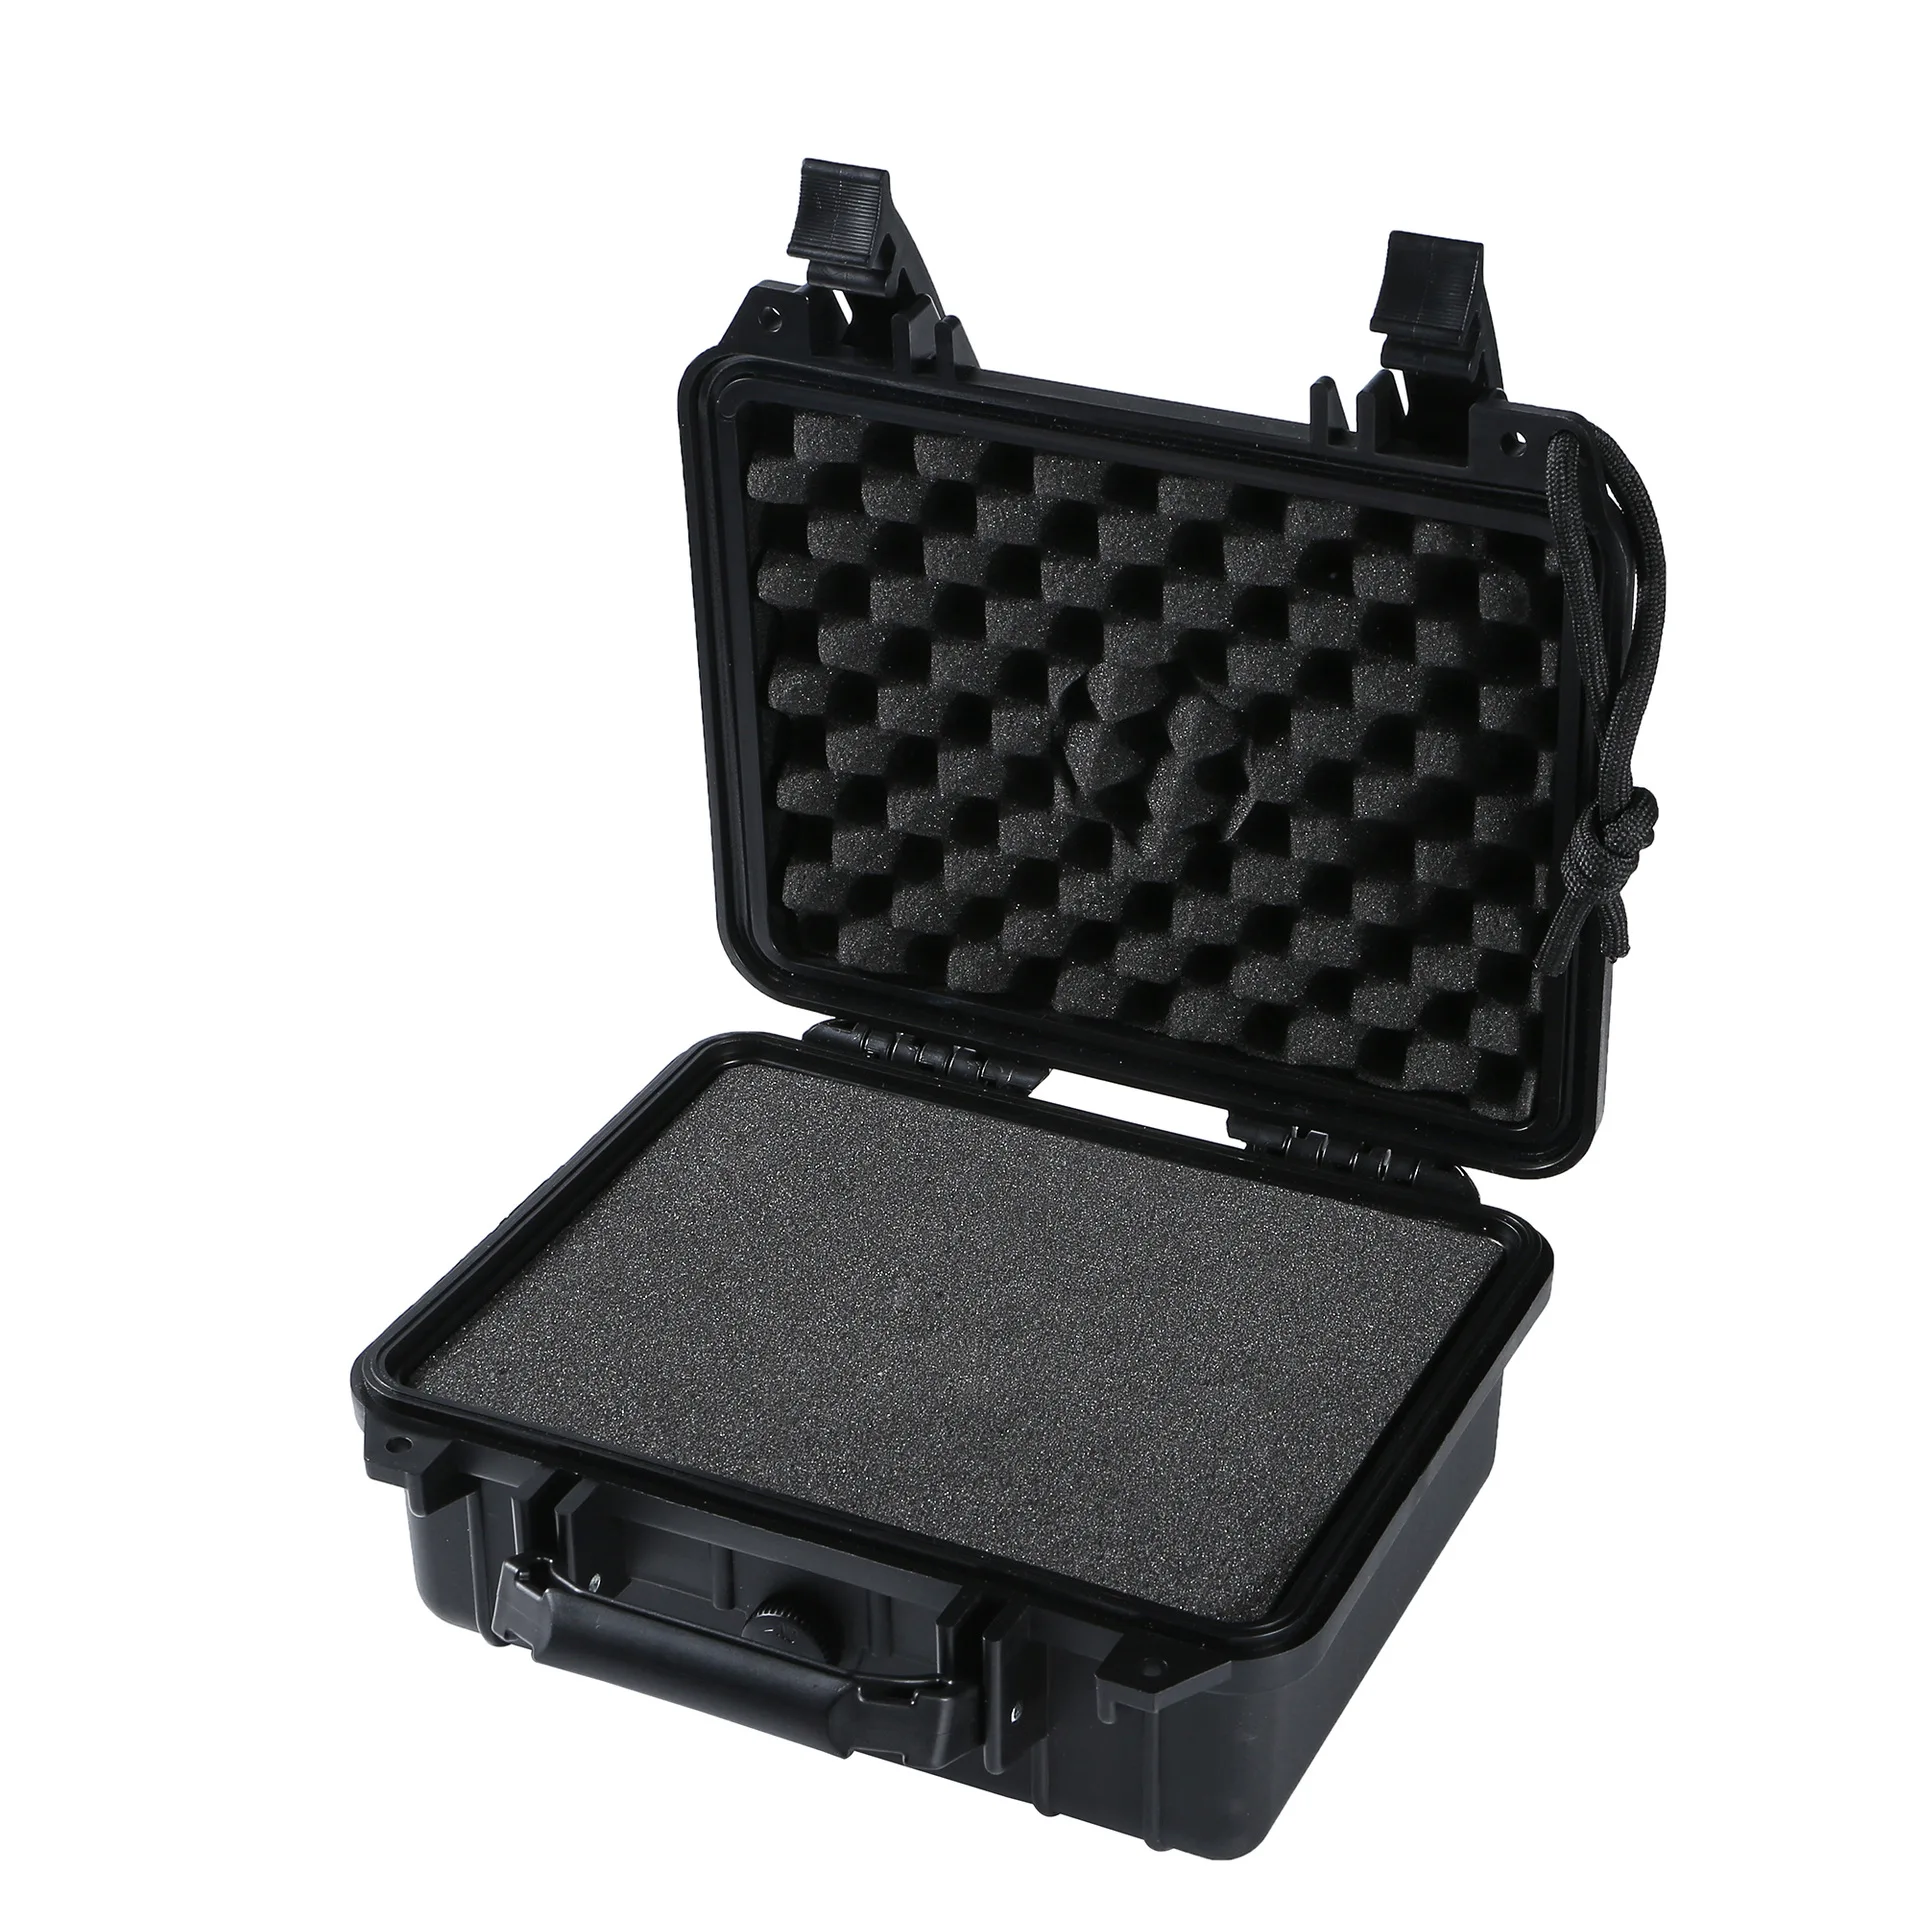 Transport Equipment Car Tools Set Box Outdoor Working Complete Storage Box Tool Professional Waterproof Hard Carry Case Tools